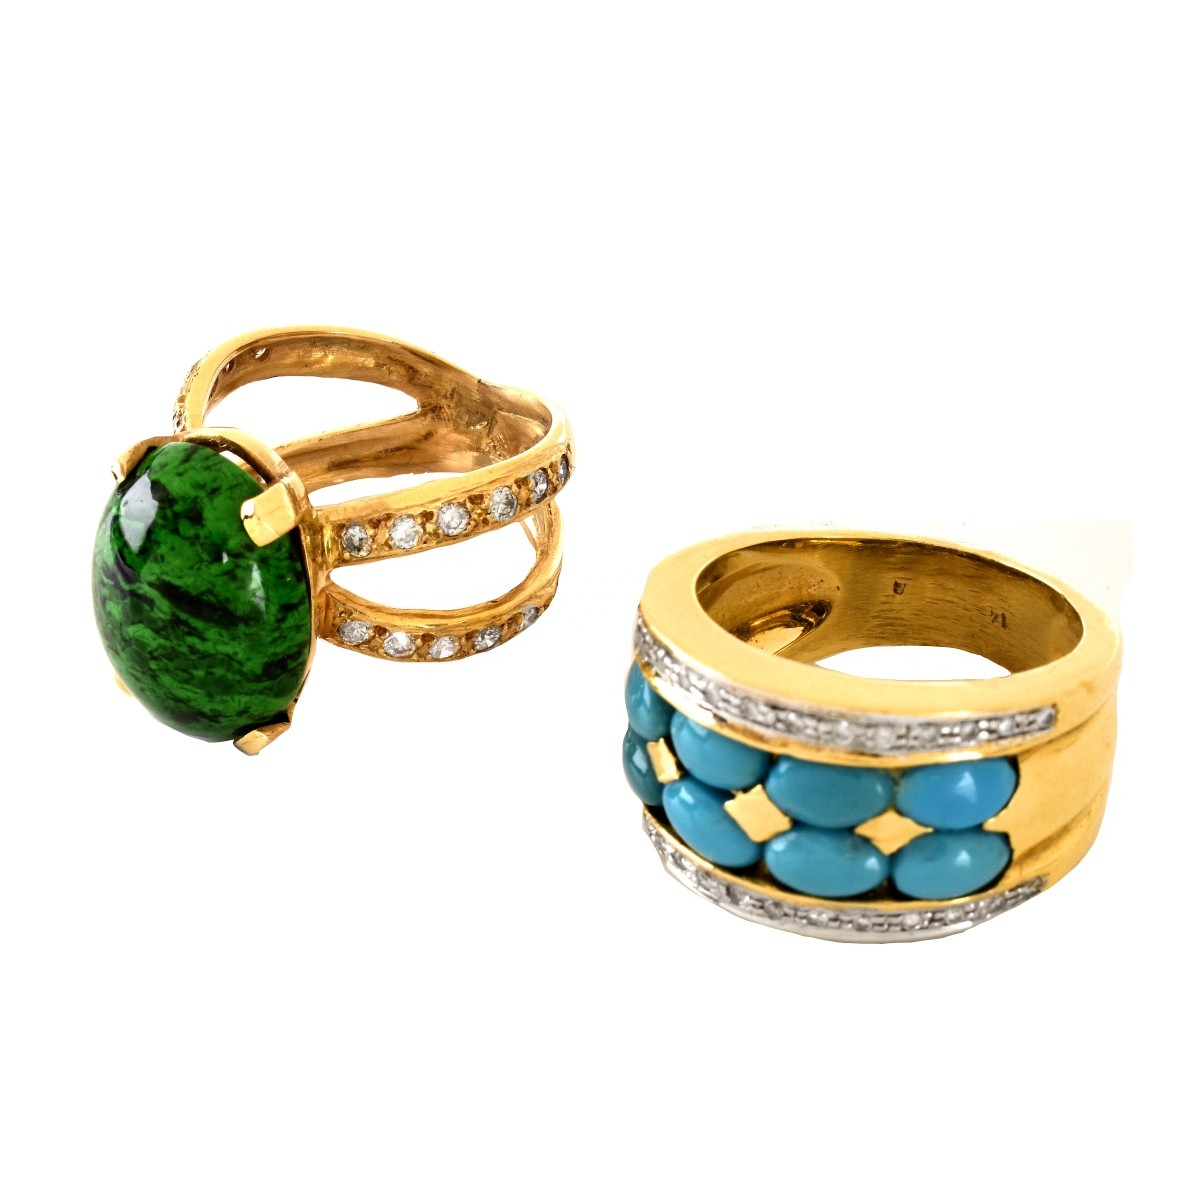 Two (2) Vintage 14K Gold Rings - Image 3 of 6